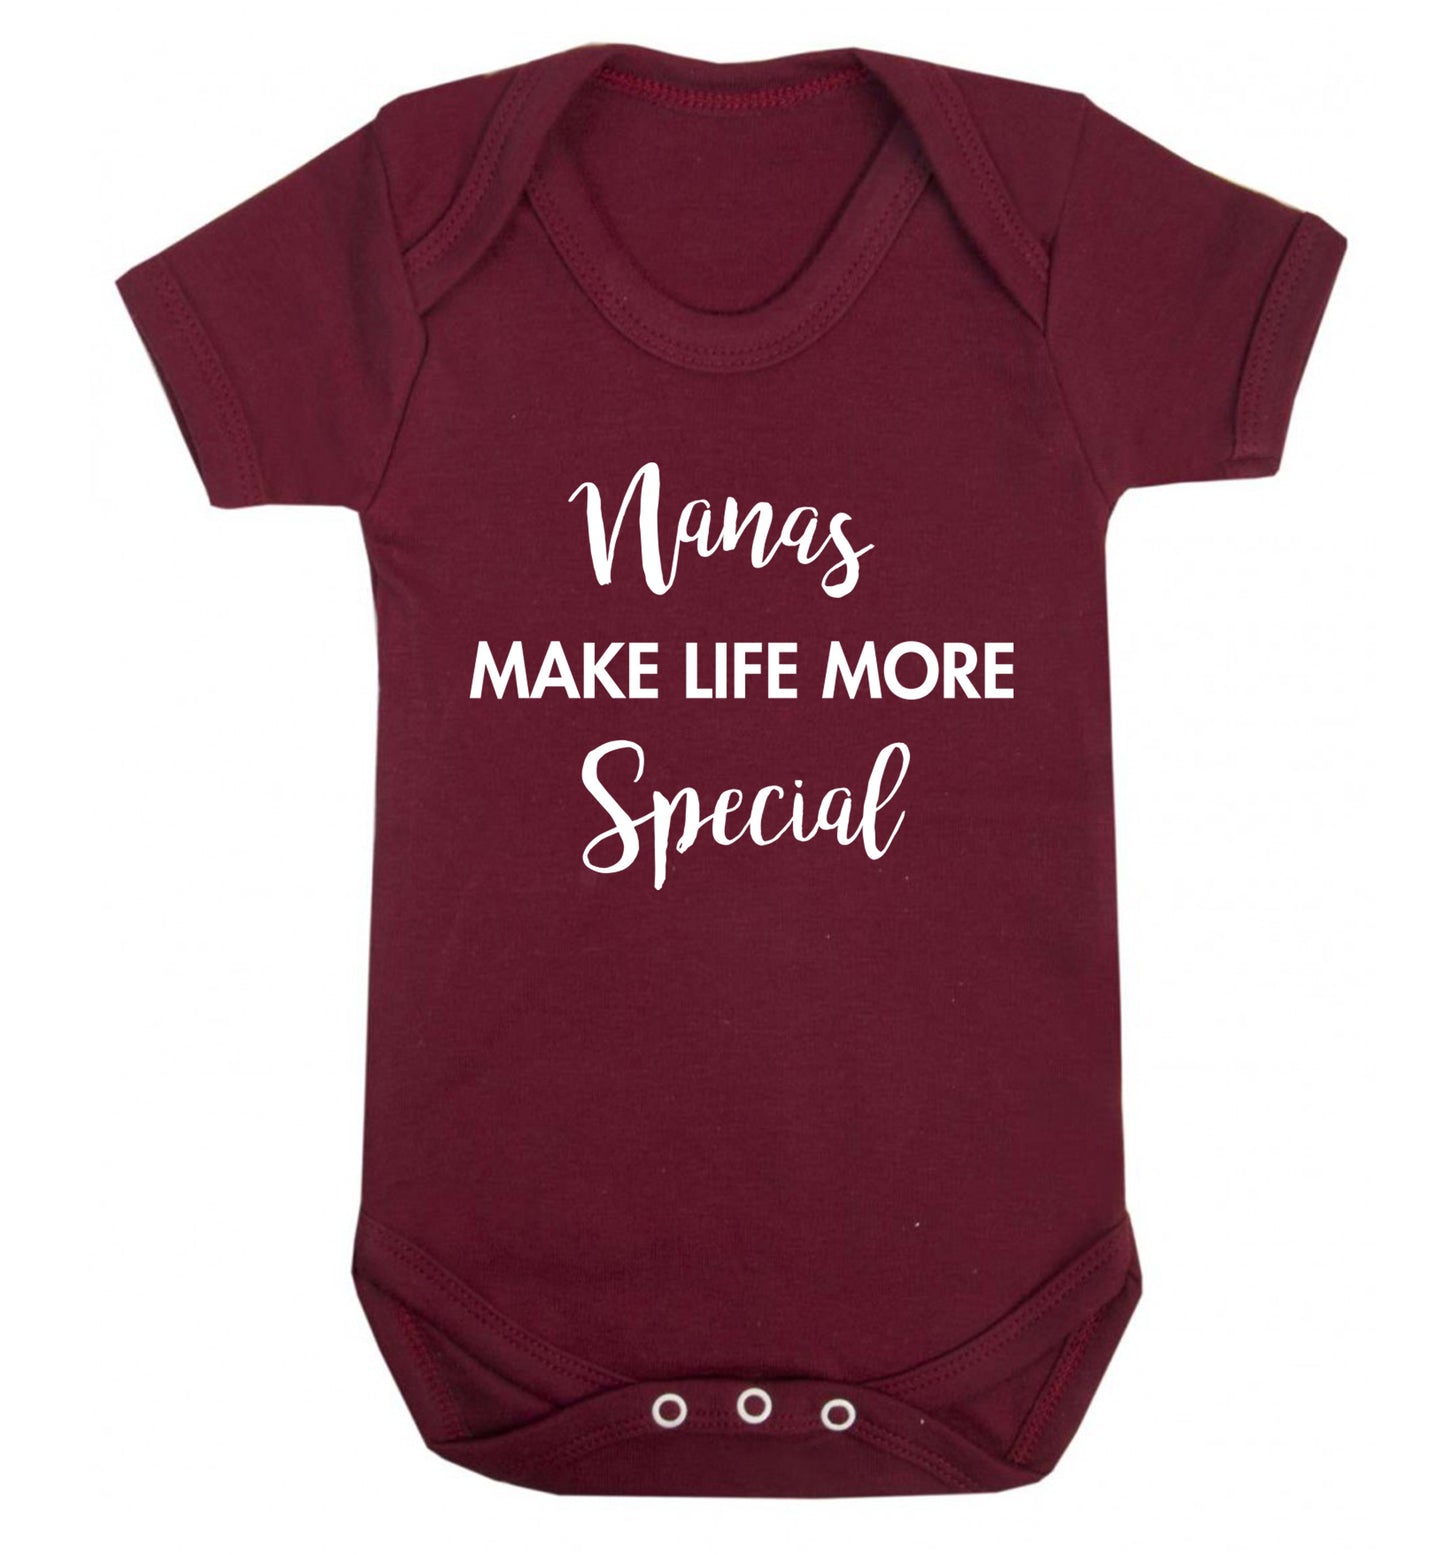 Nanas make life more special Baby Vest maroon 18-24 months